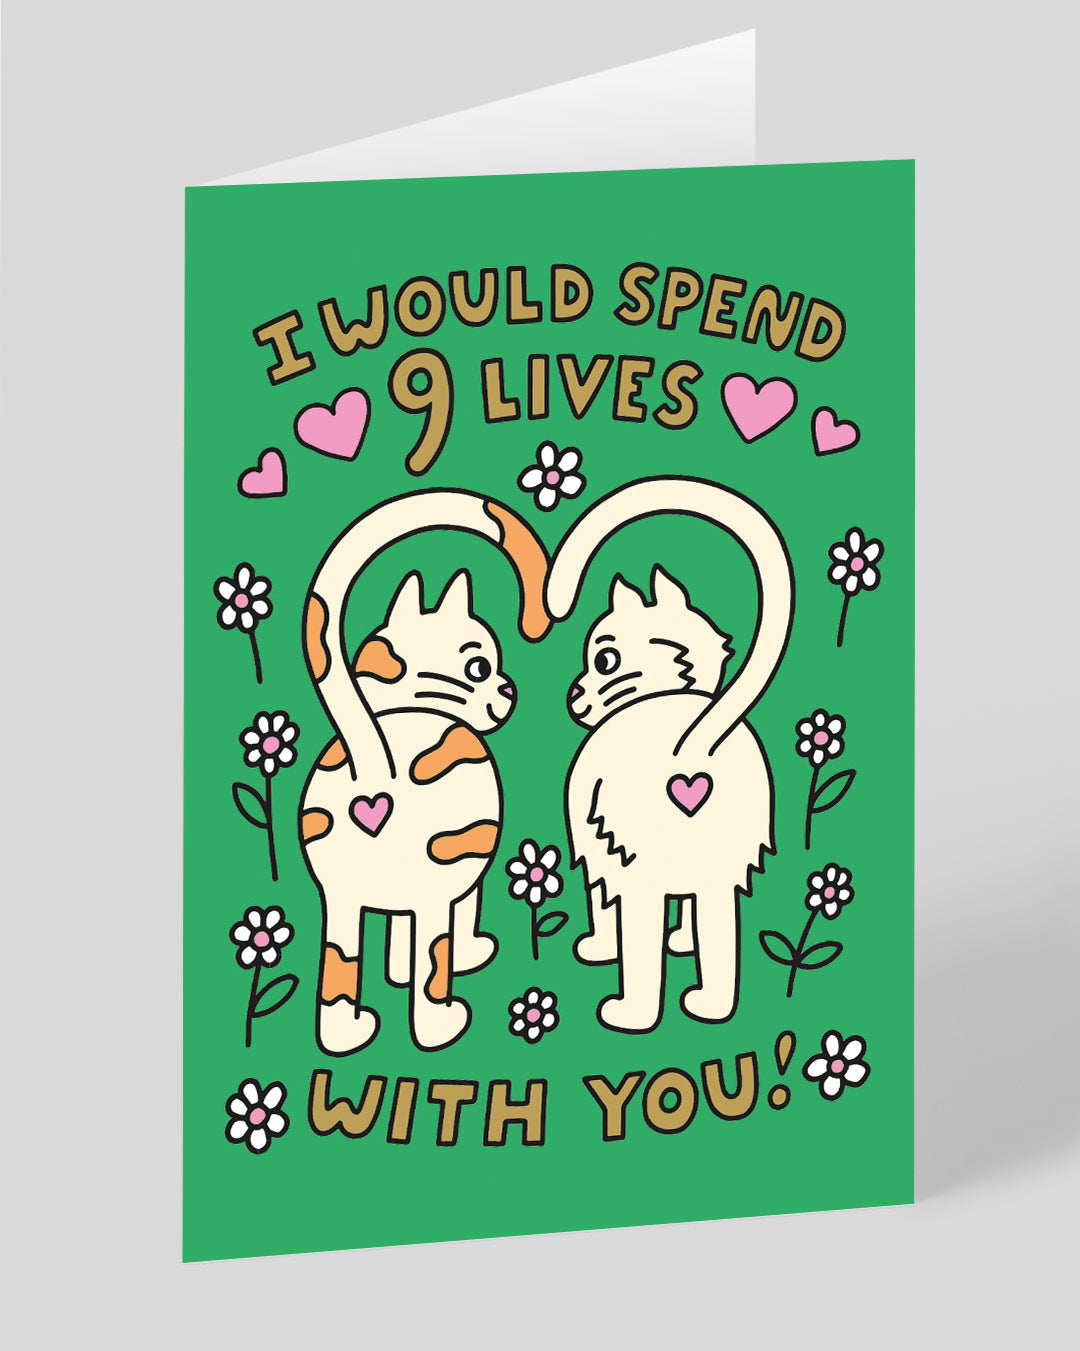 Valentine’s Day | Cute Valentines Card For Cat Lovers | I Would Spend 9 Lives With You Greeting Card | Ohh Deer Unique Valentine’s Card for Him or Her | Made In The UK, Eco-Friendly Materials, Plastic Free Packaging